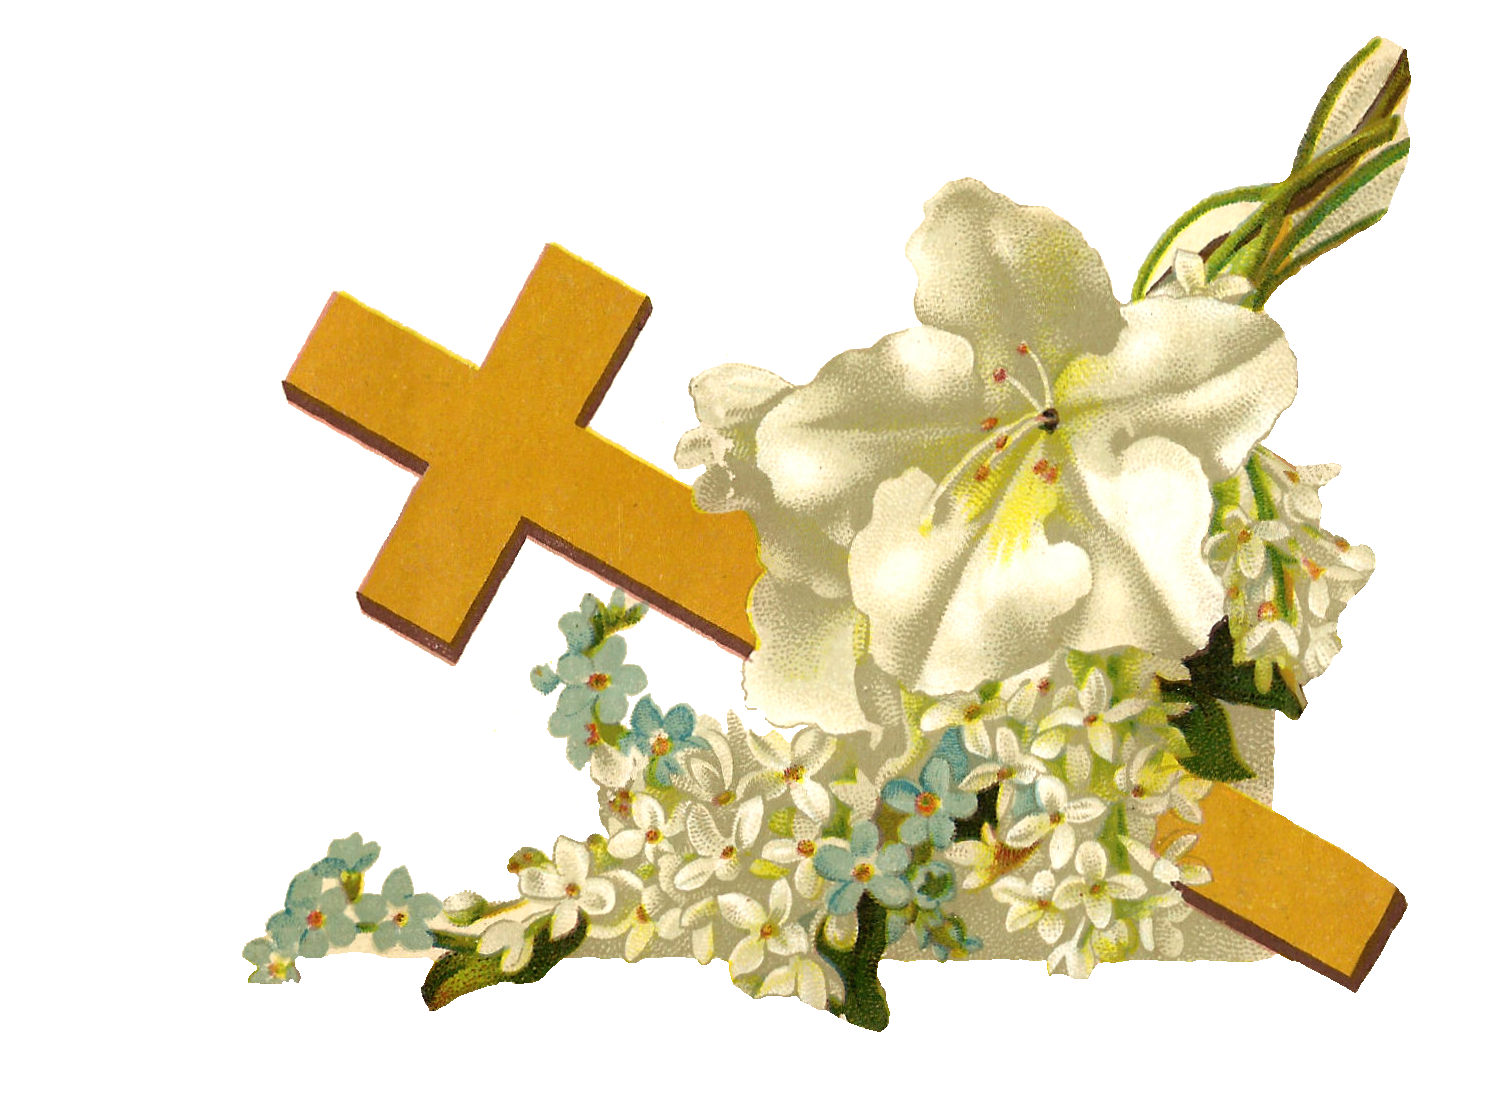 Antique Images  Free Religious Clip Art  Gold Cross And White Flowers